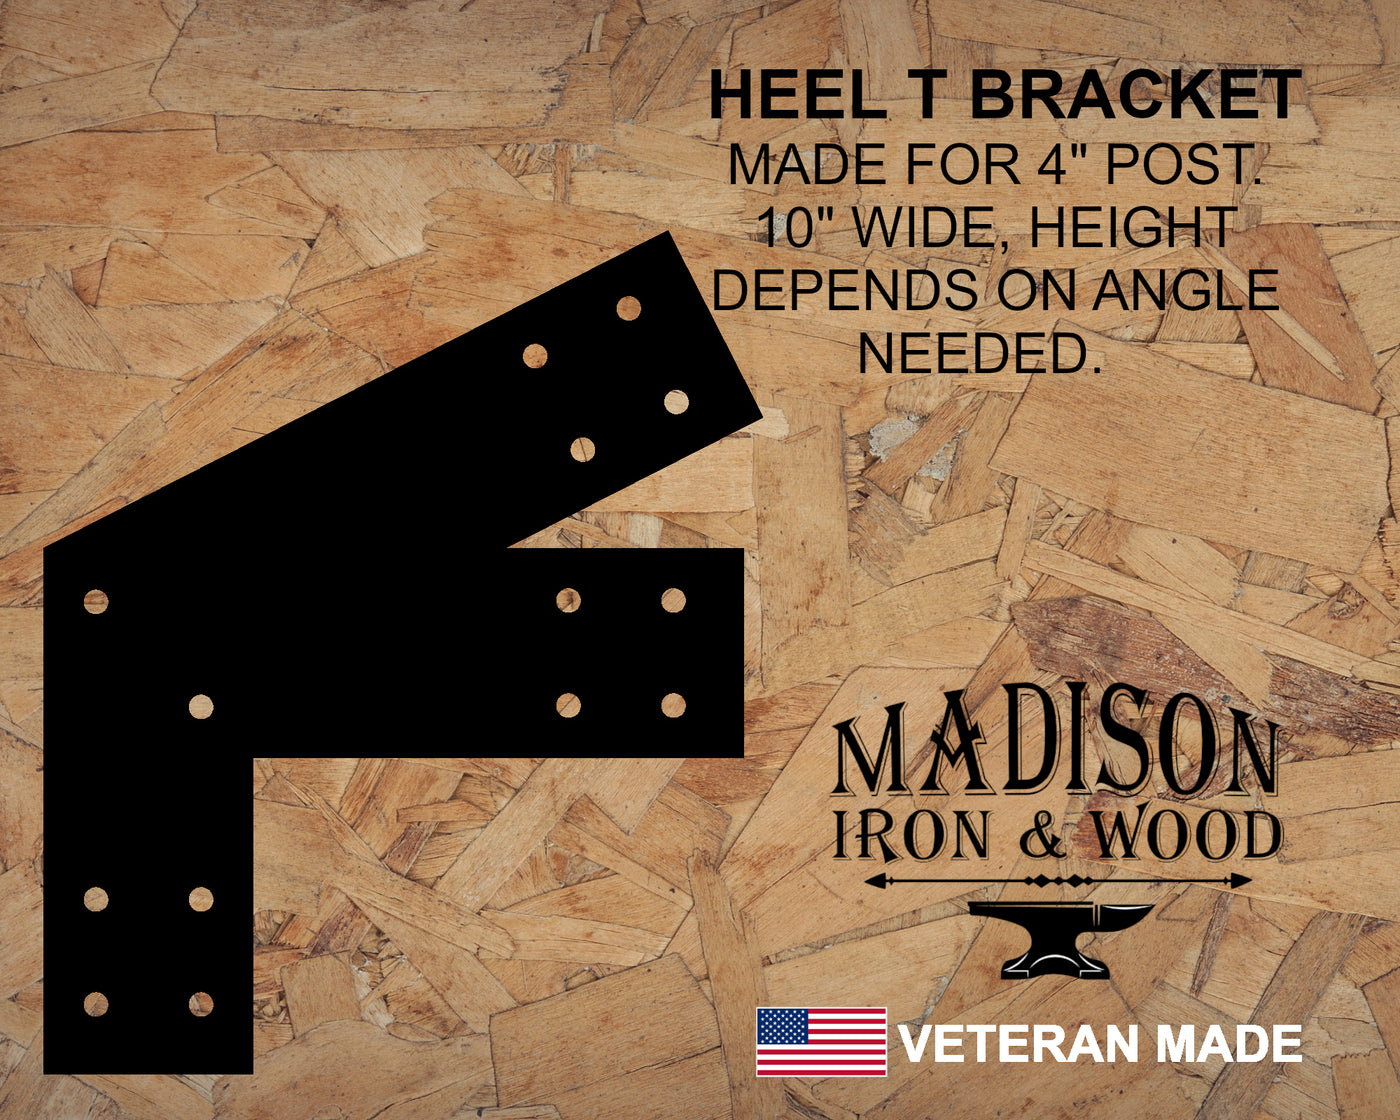 4 Inch Heel Bracket with Vertical Support Leg - Madison Iron and Wood - Brackets - metal outdoor decor - Steel deocrations - american made products - veteran owned business products - fencing decorations - fencing supplies - custom wall decorations - personalized wall signs - steel - decorative post caps - steel post caps - metal post caps - brackets - structural brackets - home improvement - easter - easter decorations - easter gift - easter yard decor